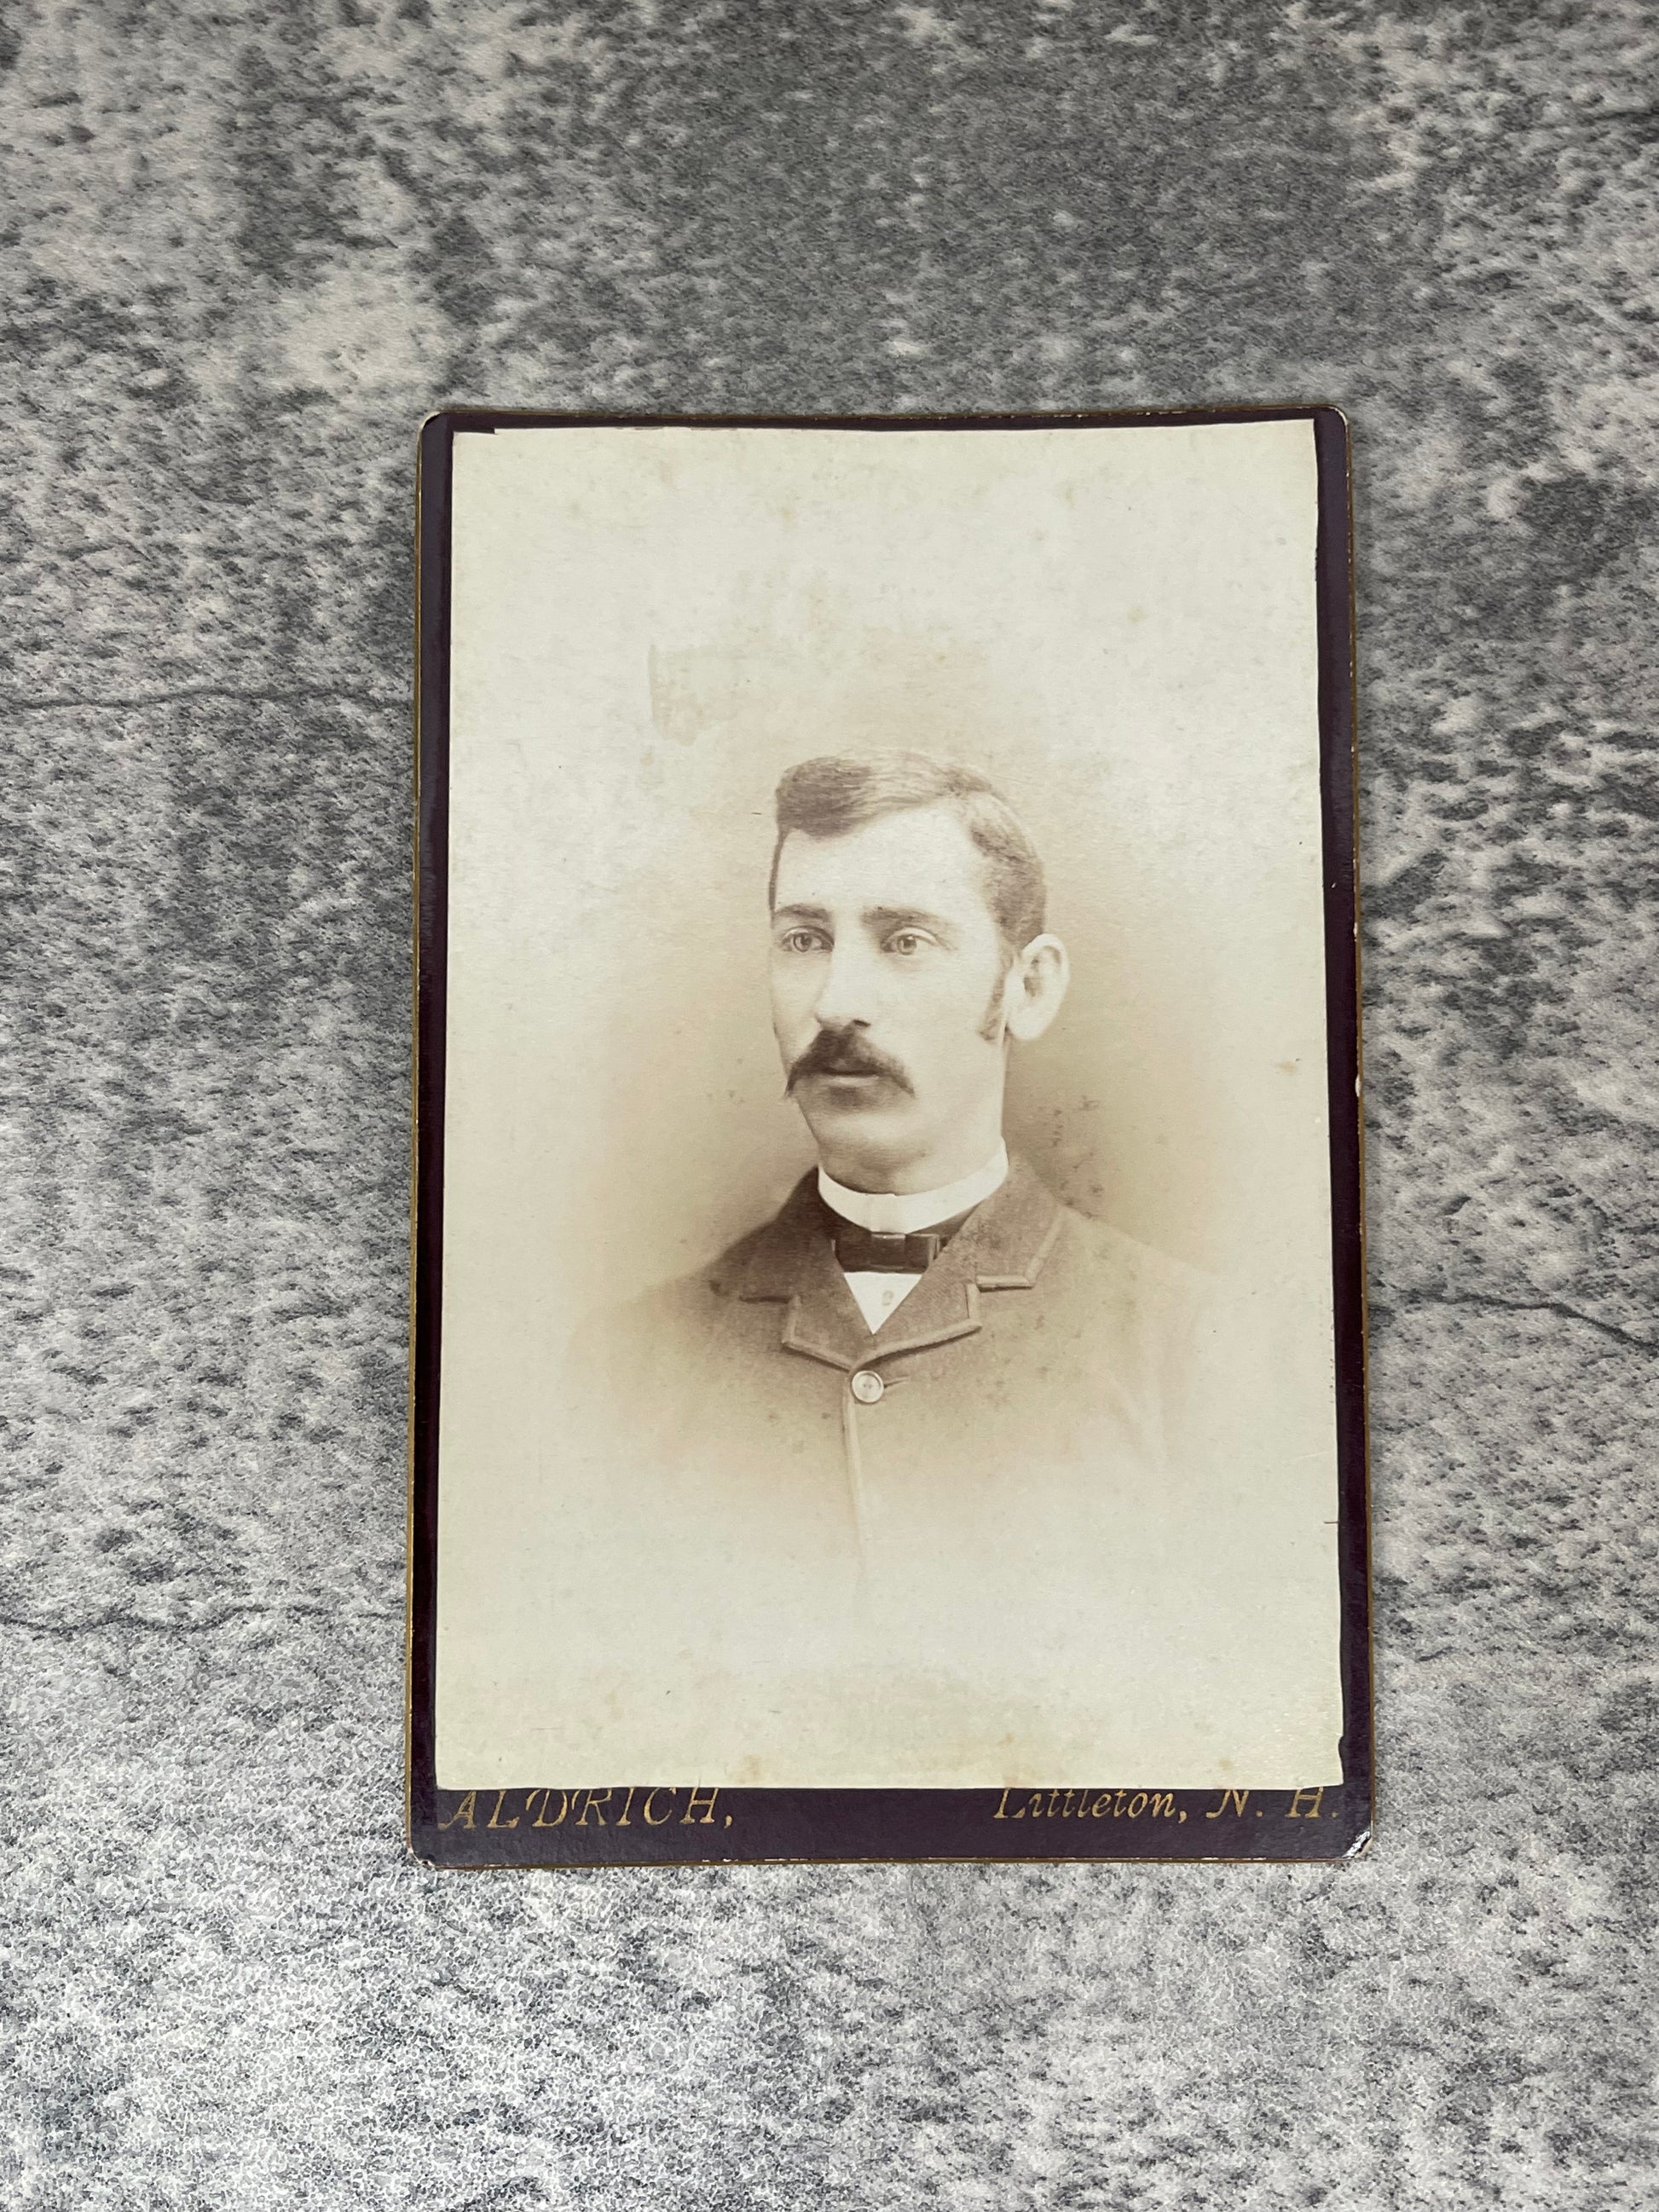 Cabinet Card Photo of a middle-aged man - Precious Cache